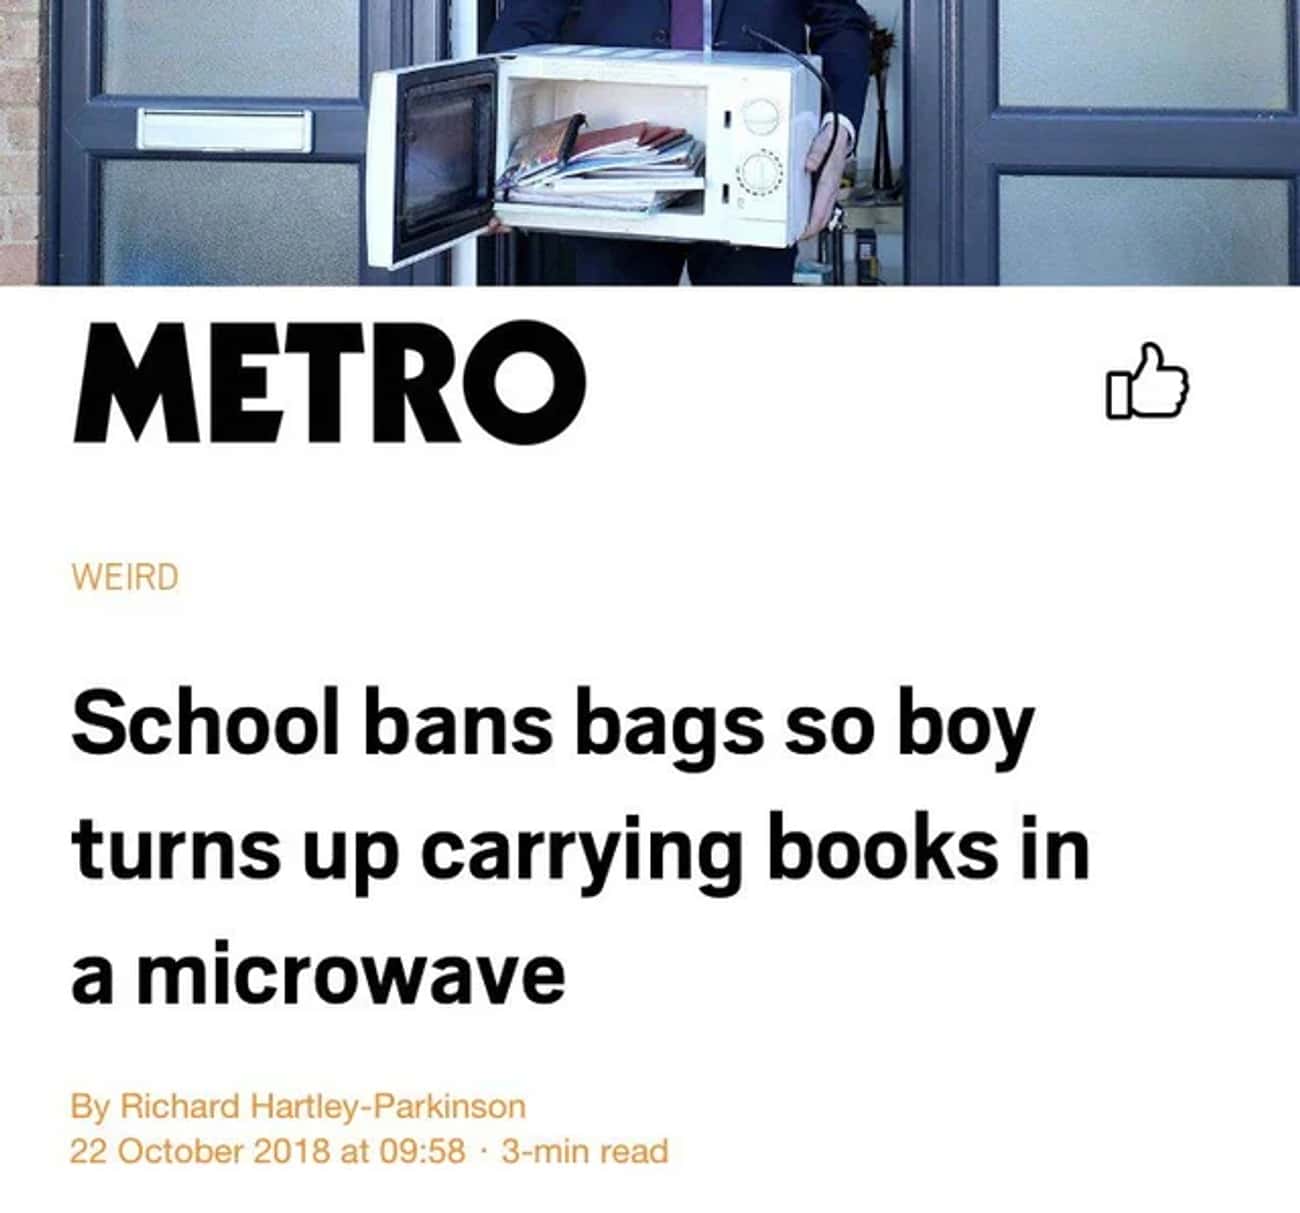 Why Did They Ban Bags?